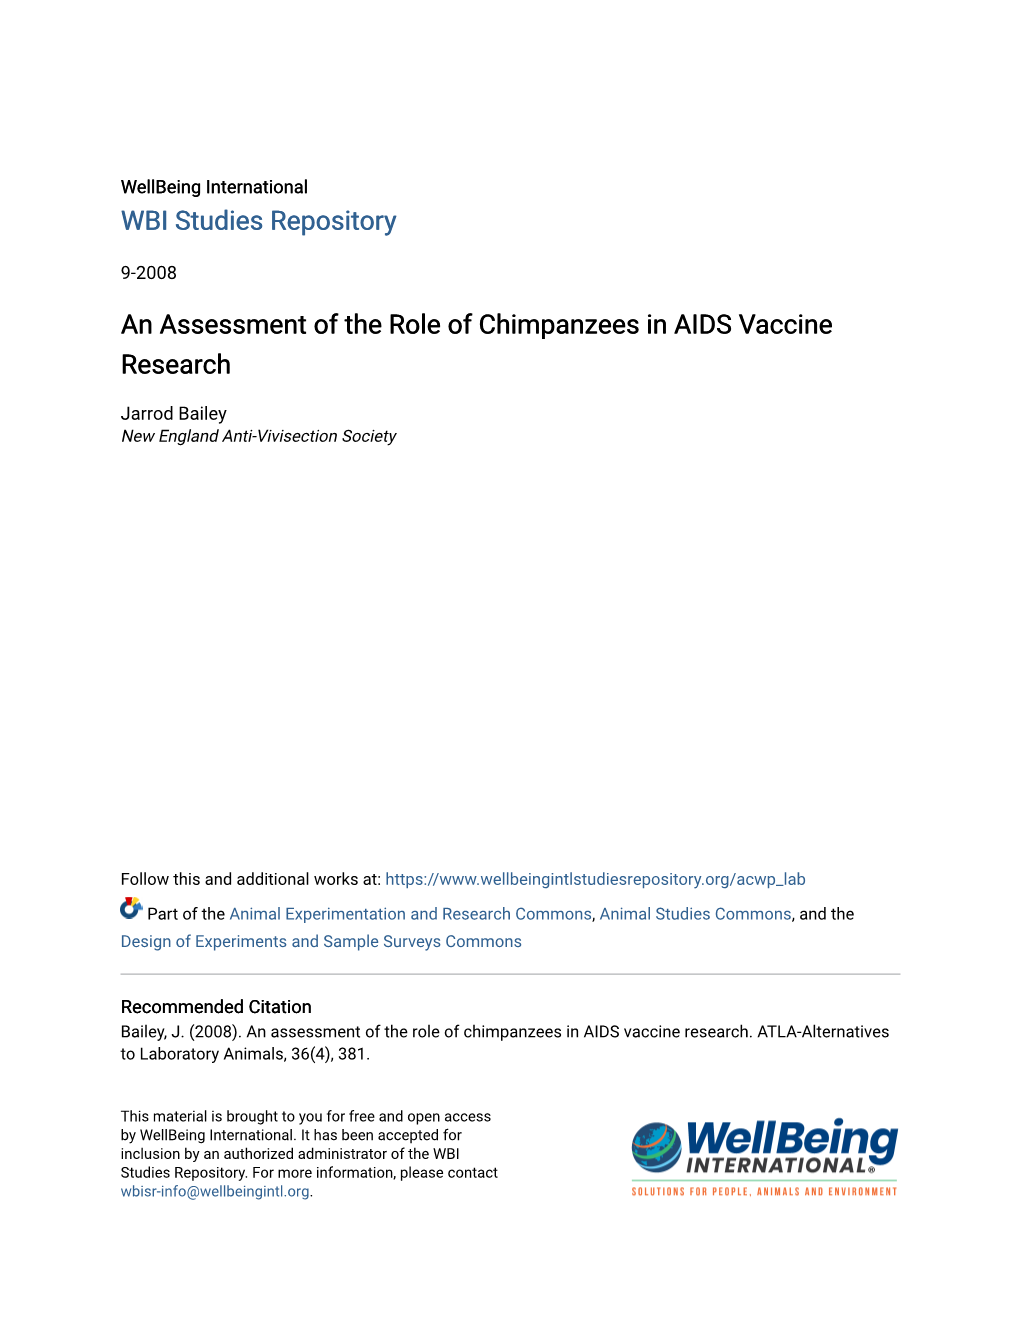 An Assessment of the Role of Chimpanzees in AIDS Vaccine Research